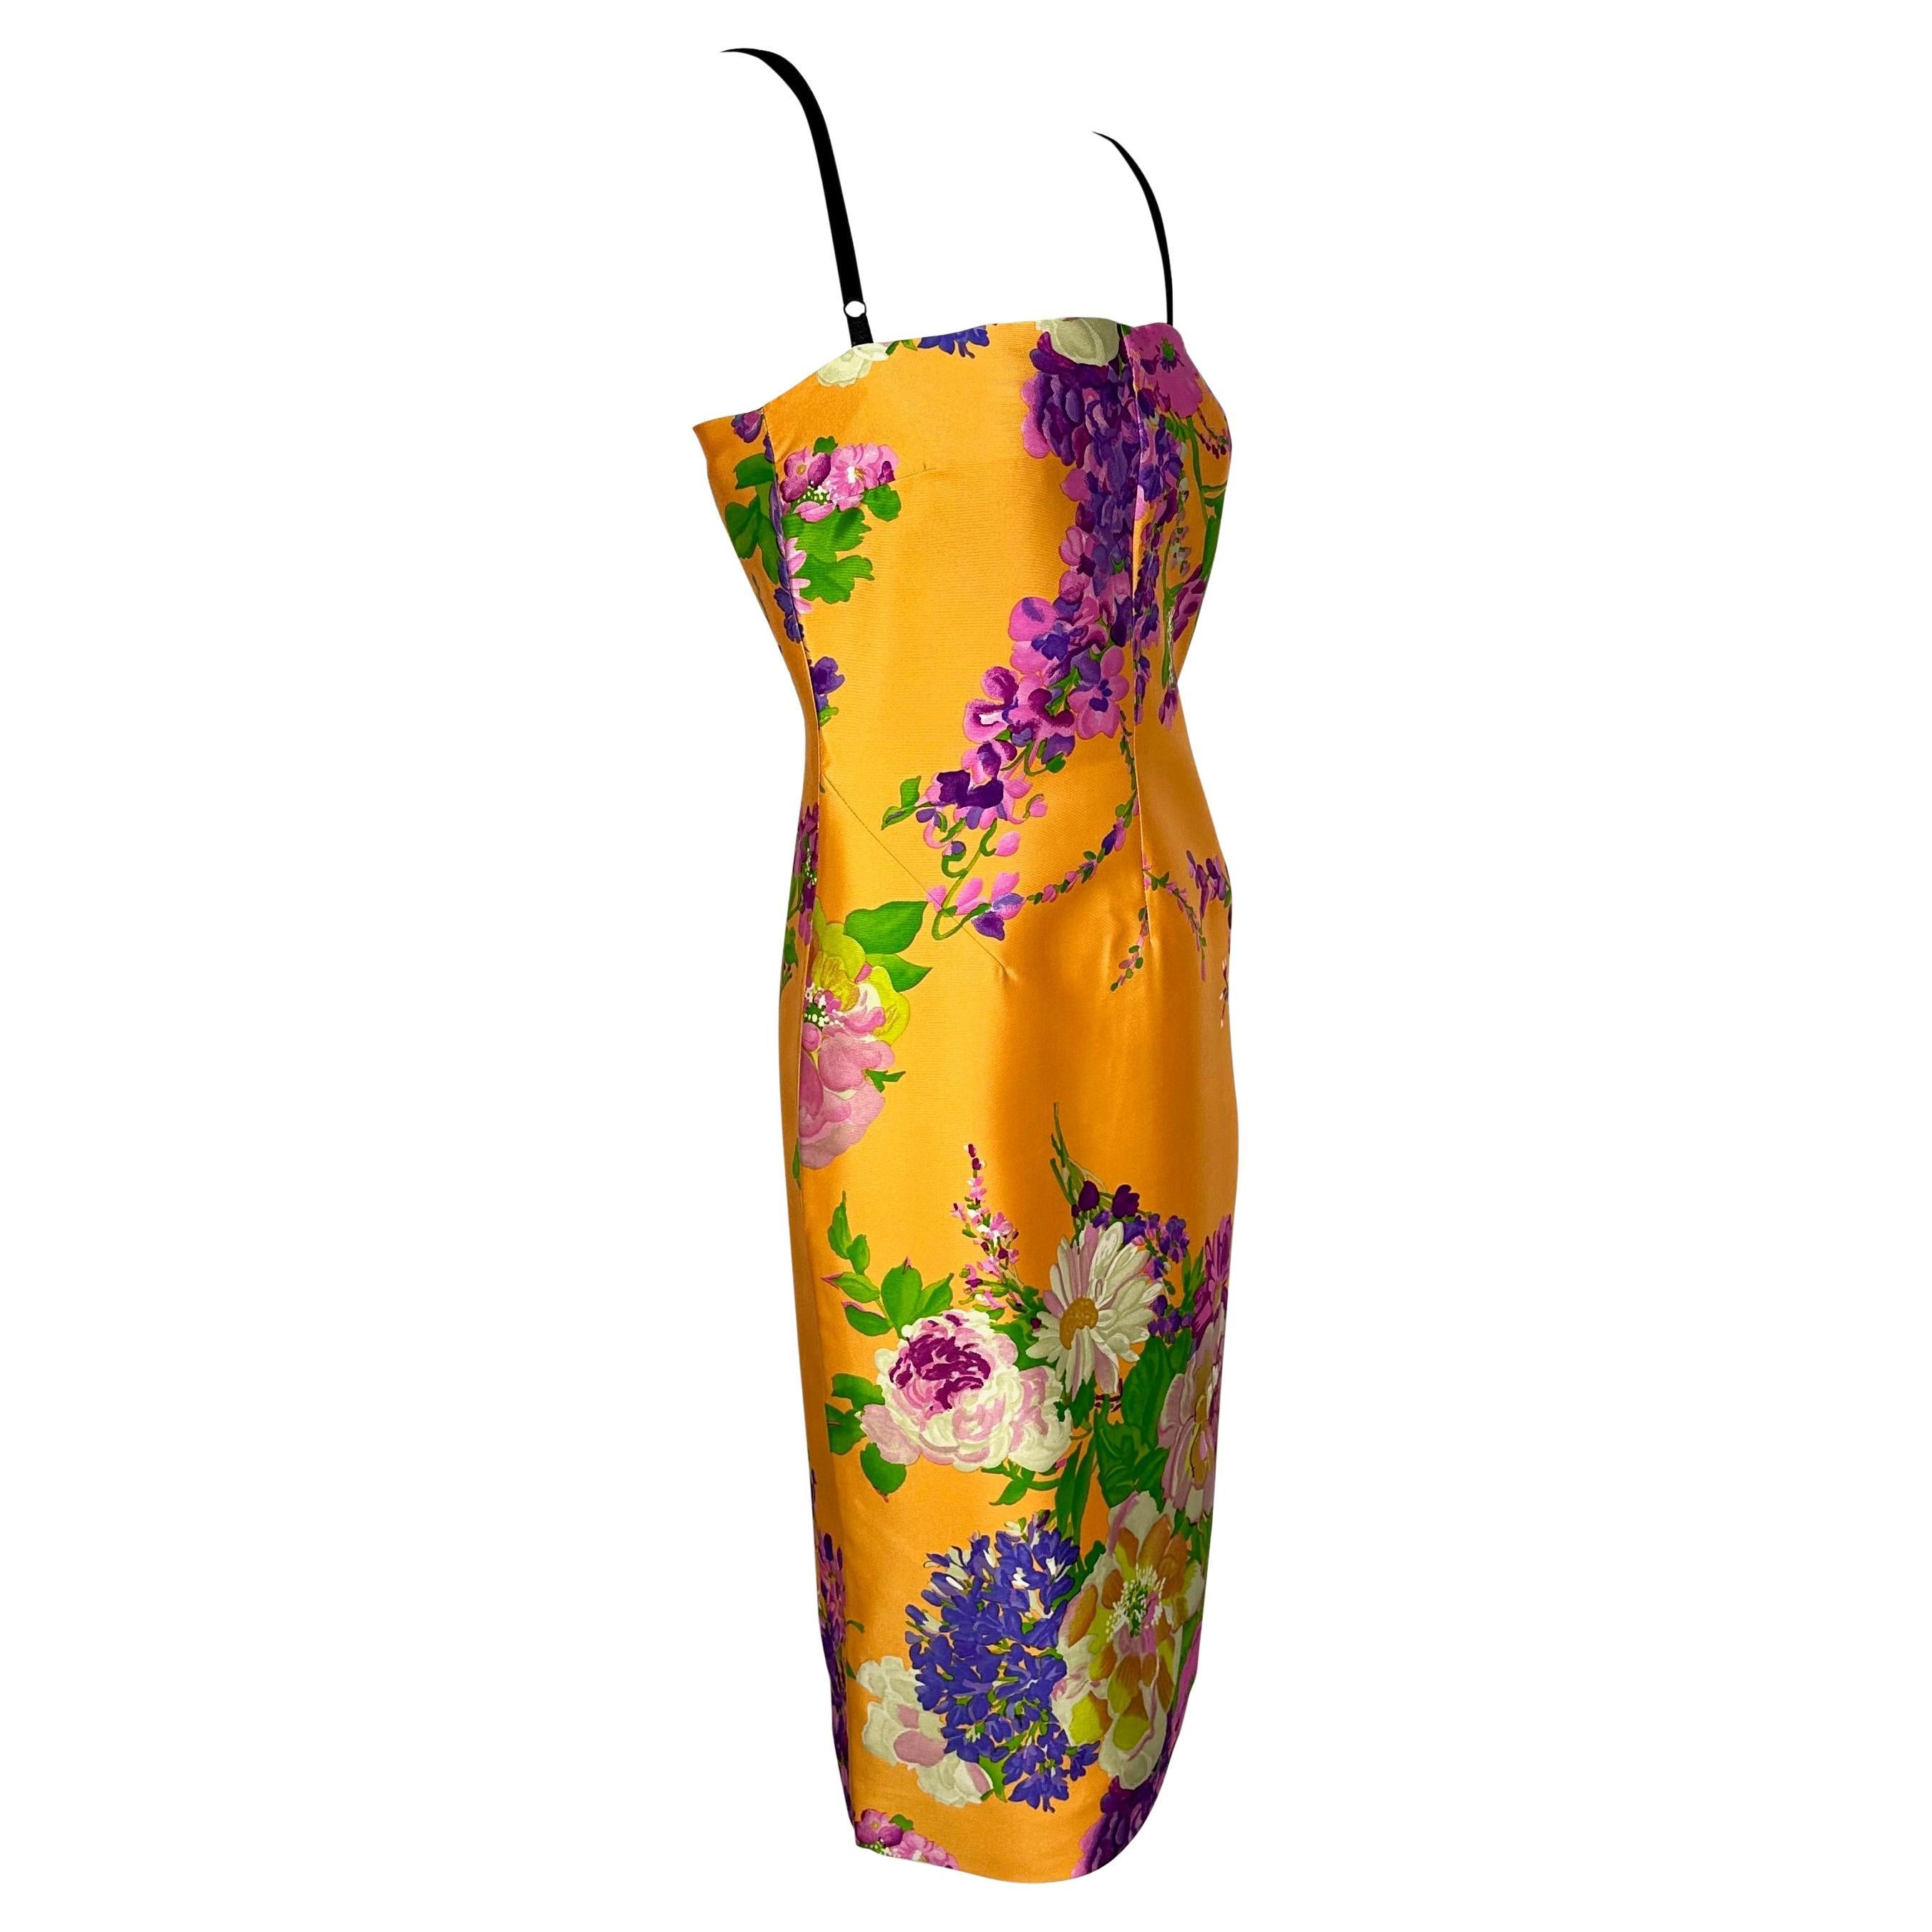 S/S 2000 Dolce & Gabbana Orange Floral Silk Bustier Mini Dress  In Good Condition For Sale In West Hollywood, CA